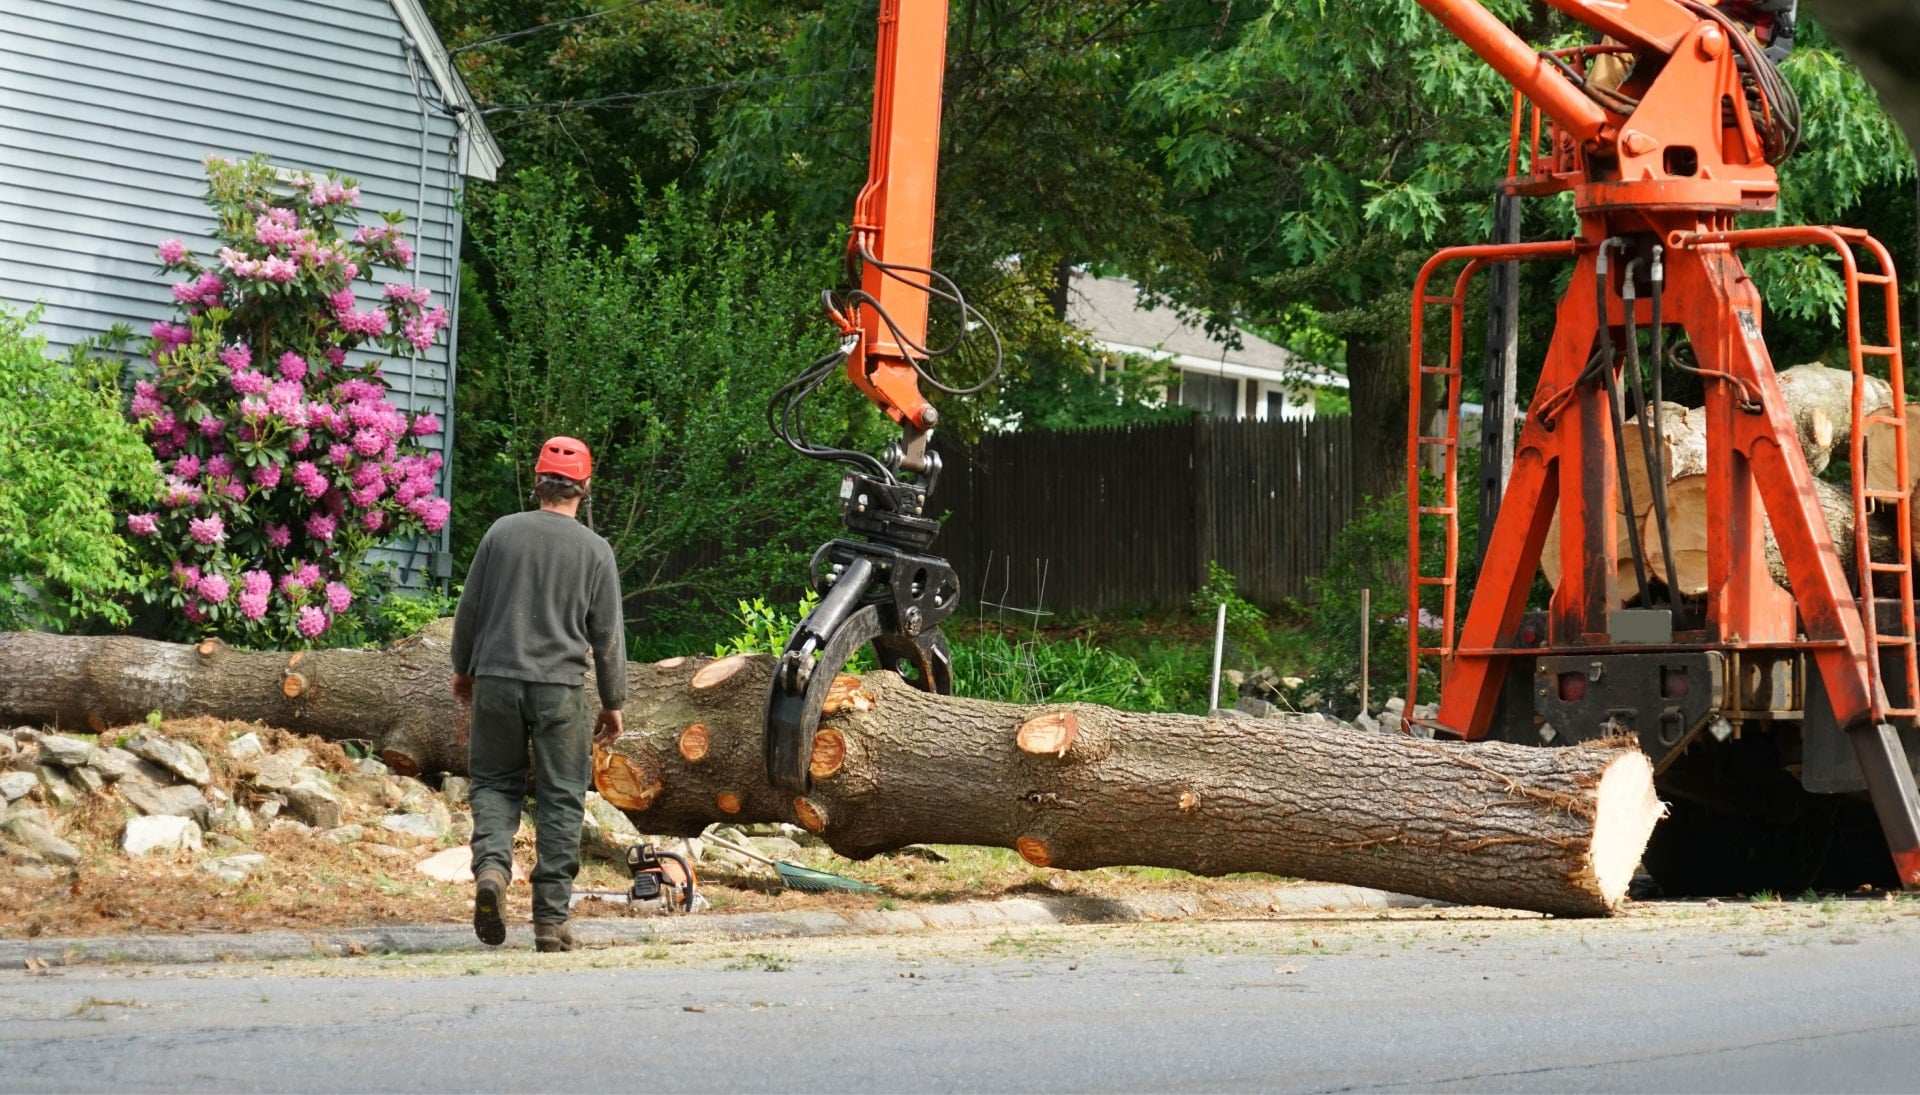 Local partner for Tree removal services in Reno